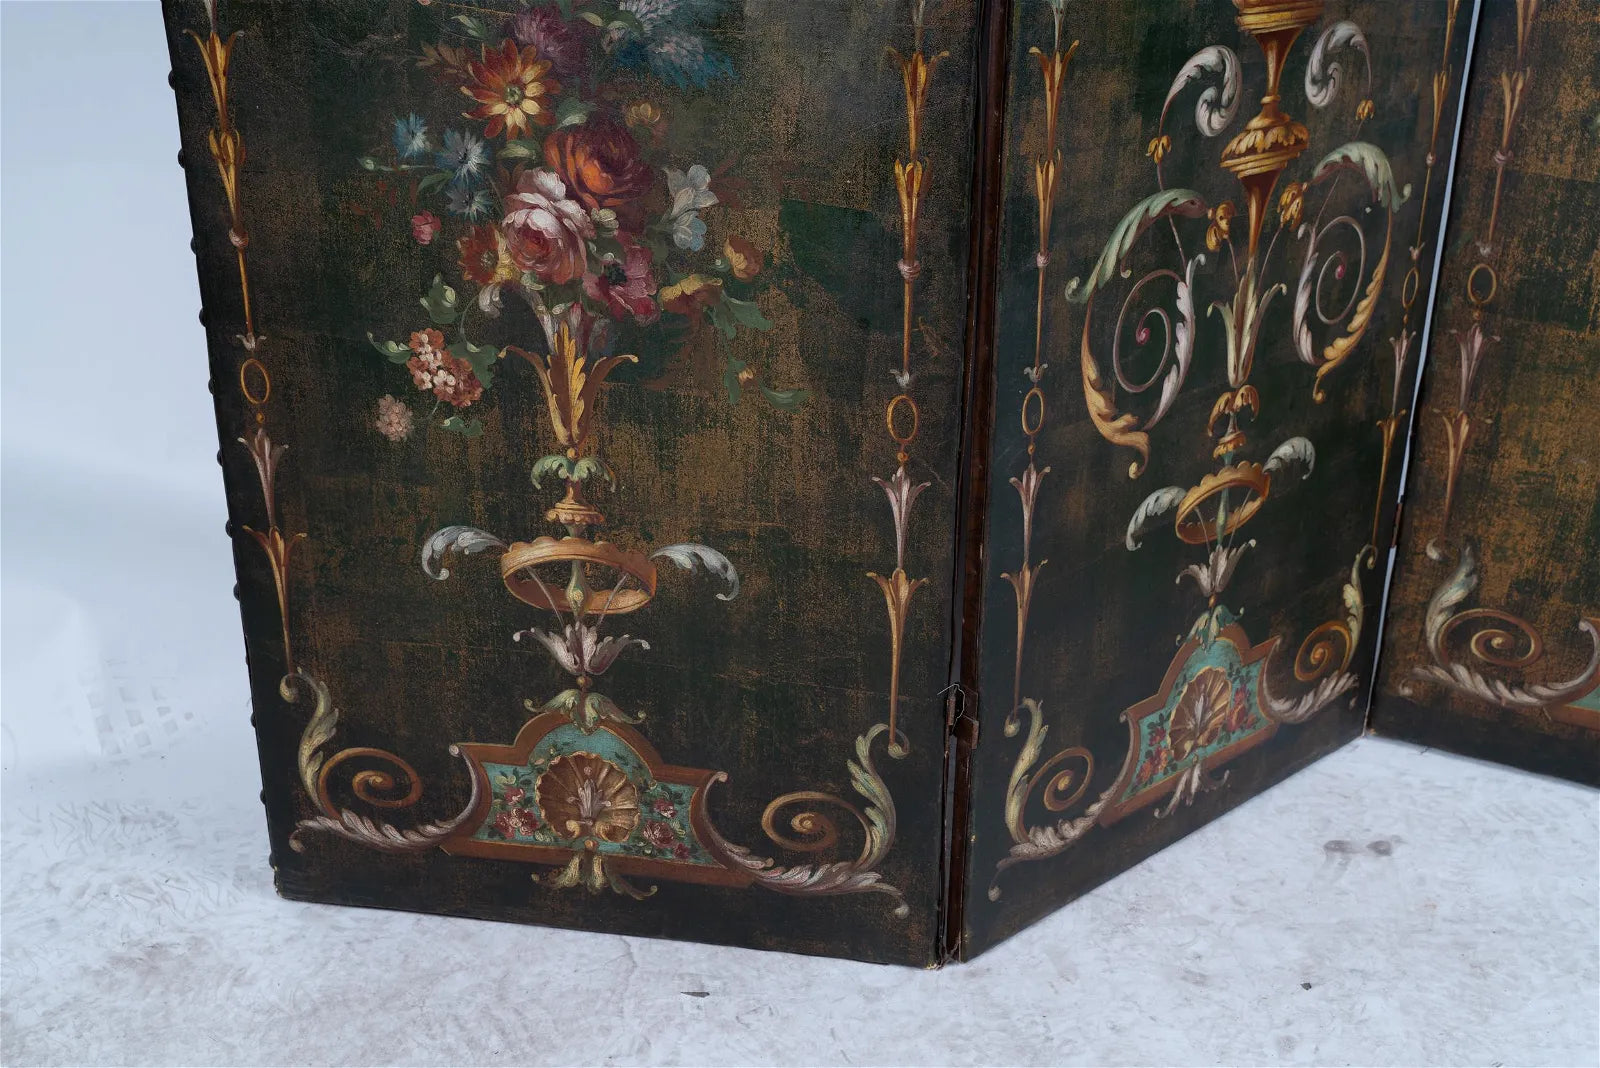 AF7-005: ANTIQUE EARLY 20TH CENTURY FRENCH THREE PANEL POLYCHROME DECORATED LEATHER SCREEN